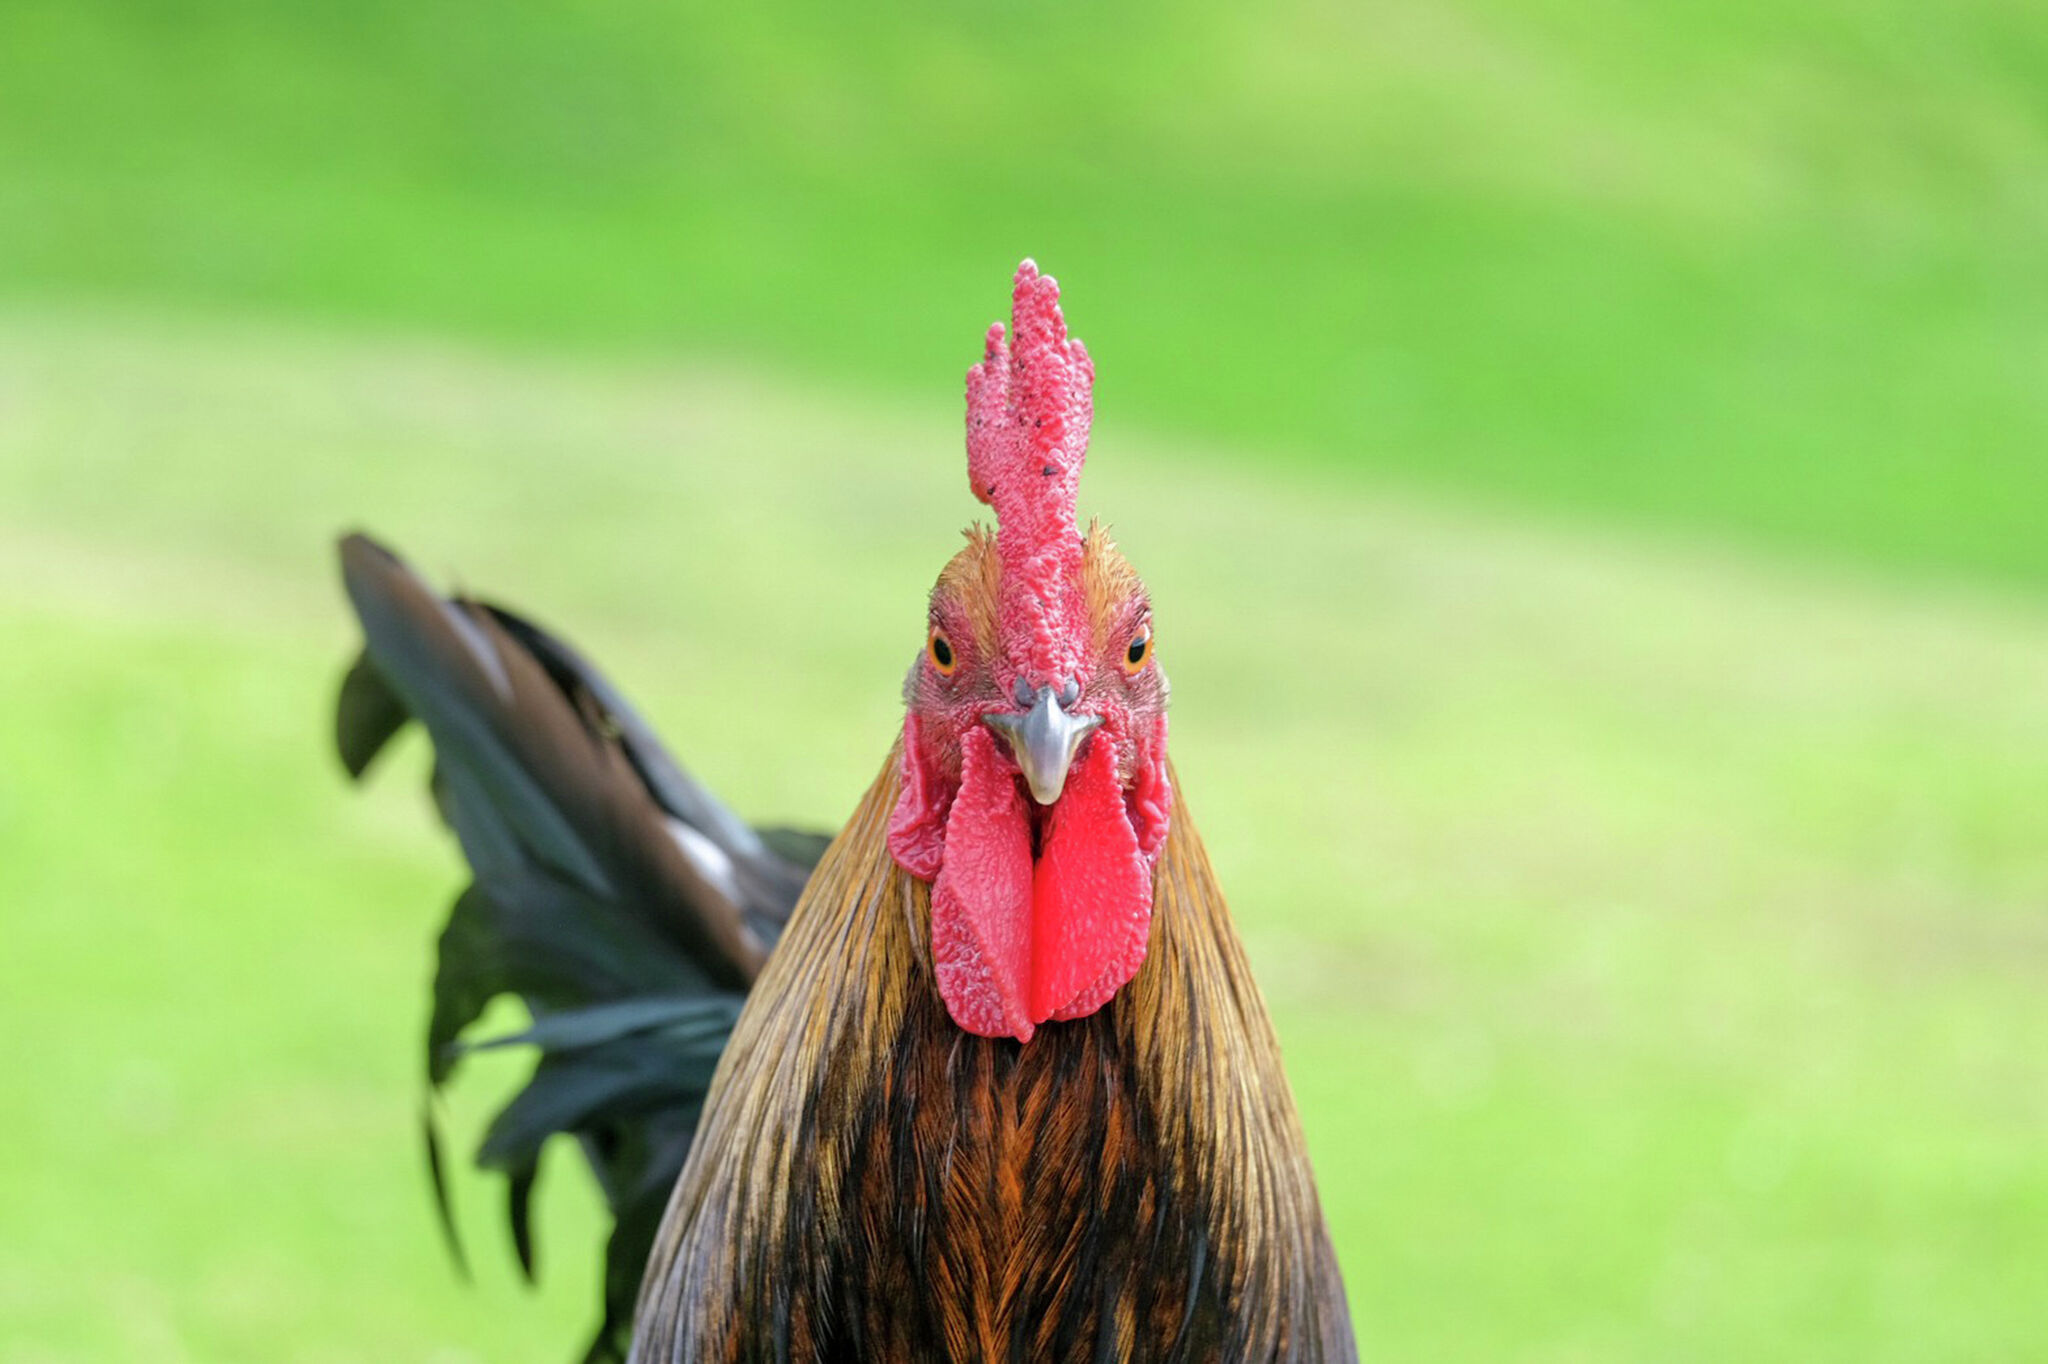 Hawaii is losing its ongoing war with feral chickens